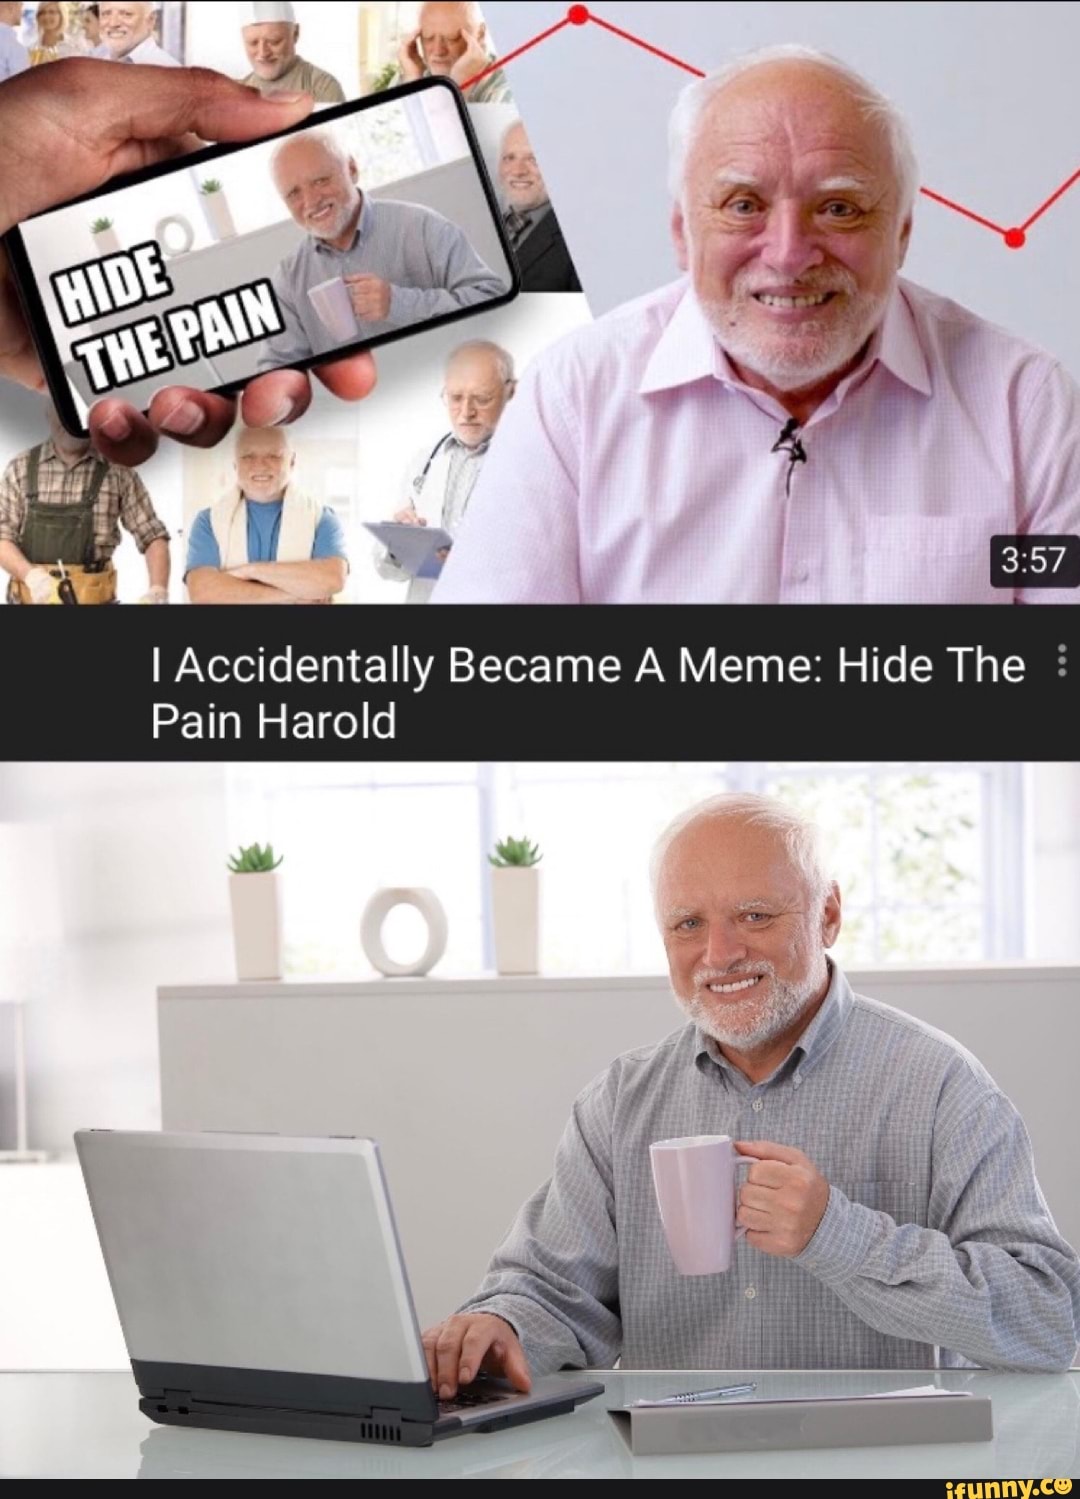 I Accidentally Became A Meme: Hide The Pain Harold - iFunny